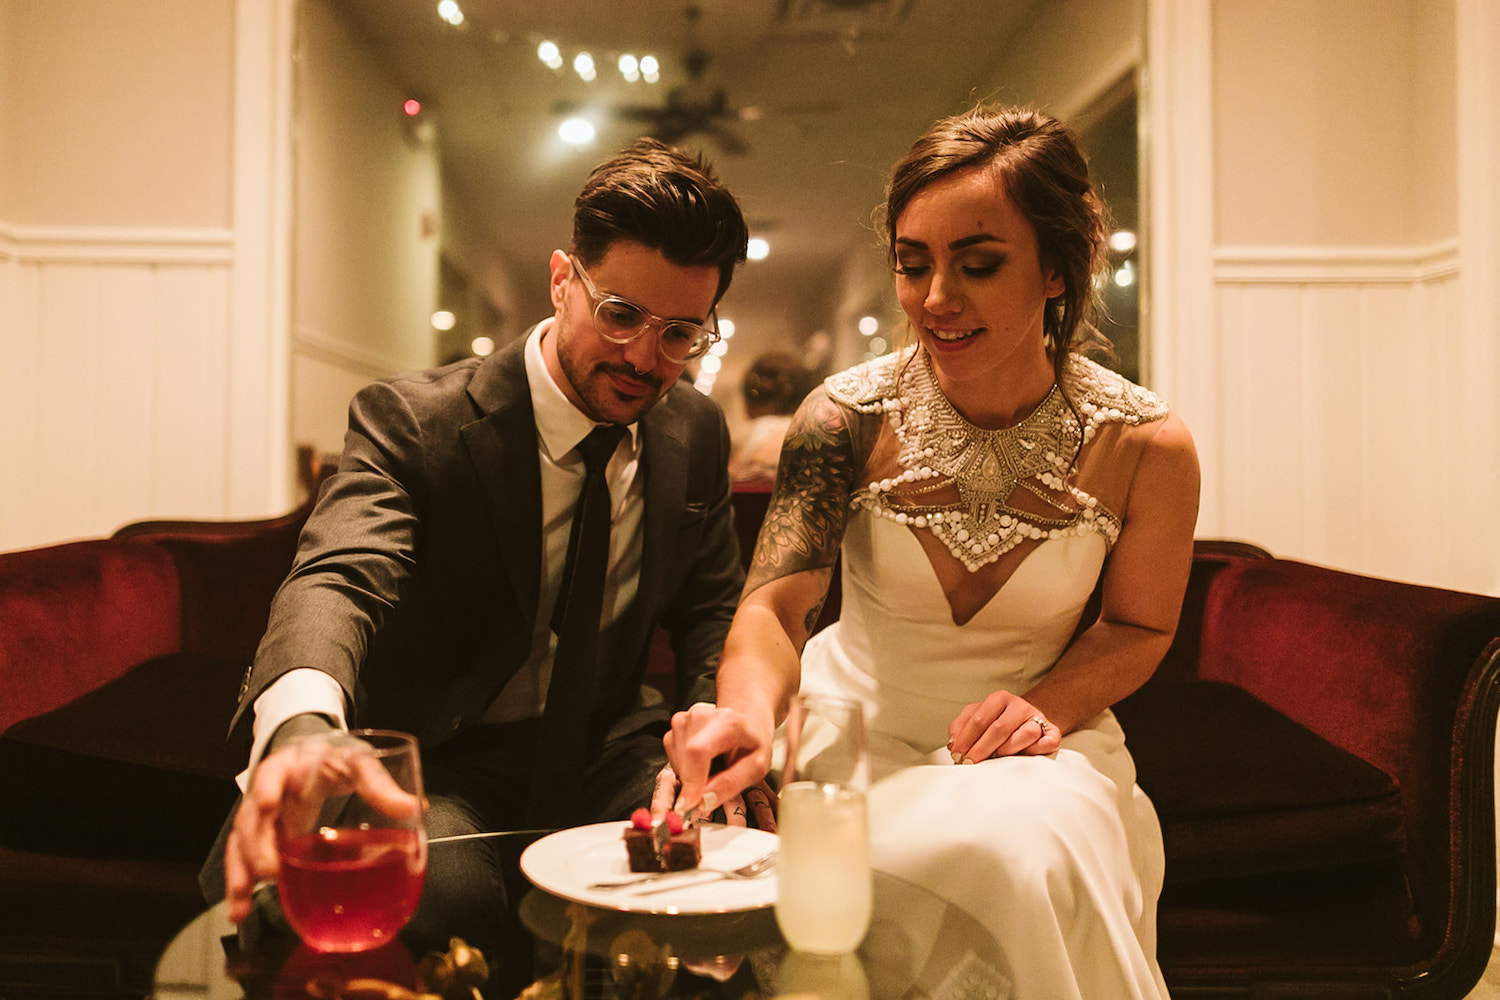 bride and groom sit close to each other on a low sofa. he reaches for cocktail and she cuts a small bit of cake with a fork